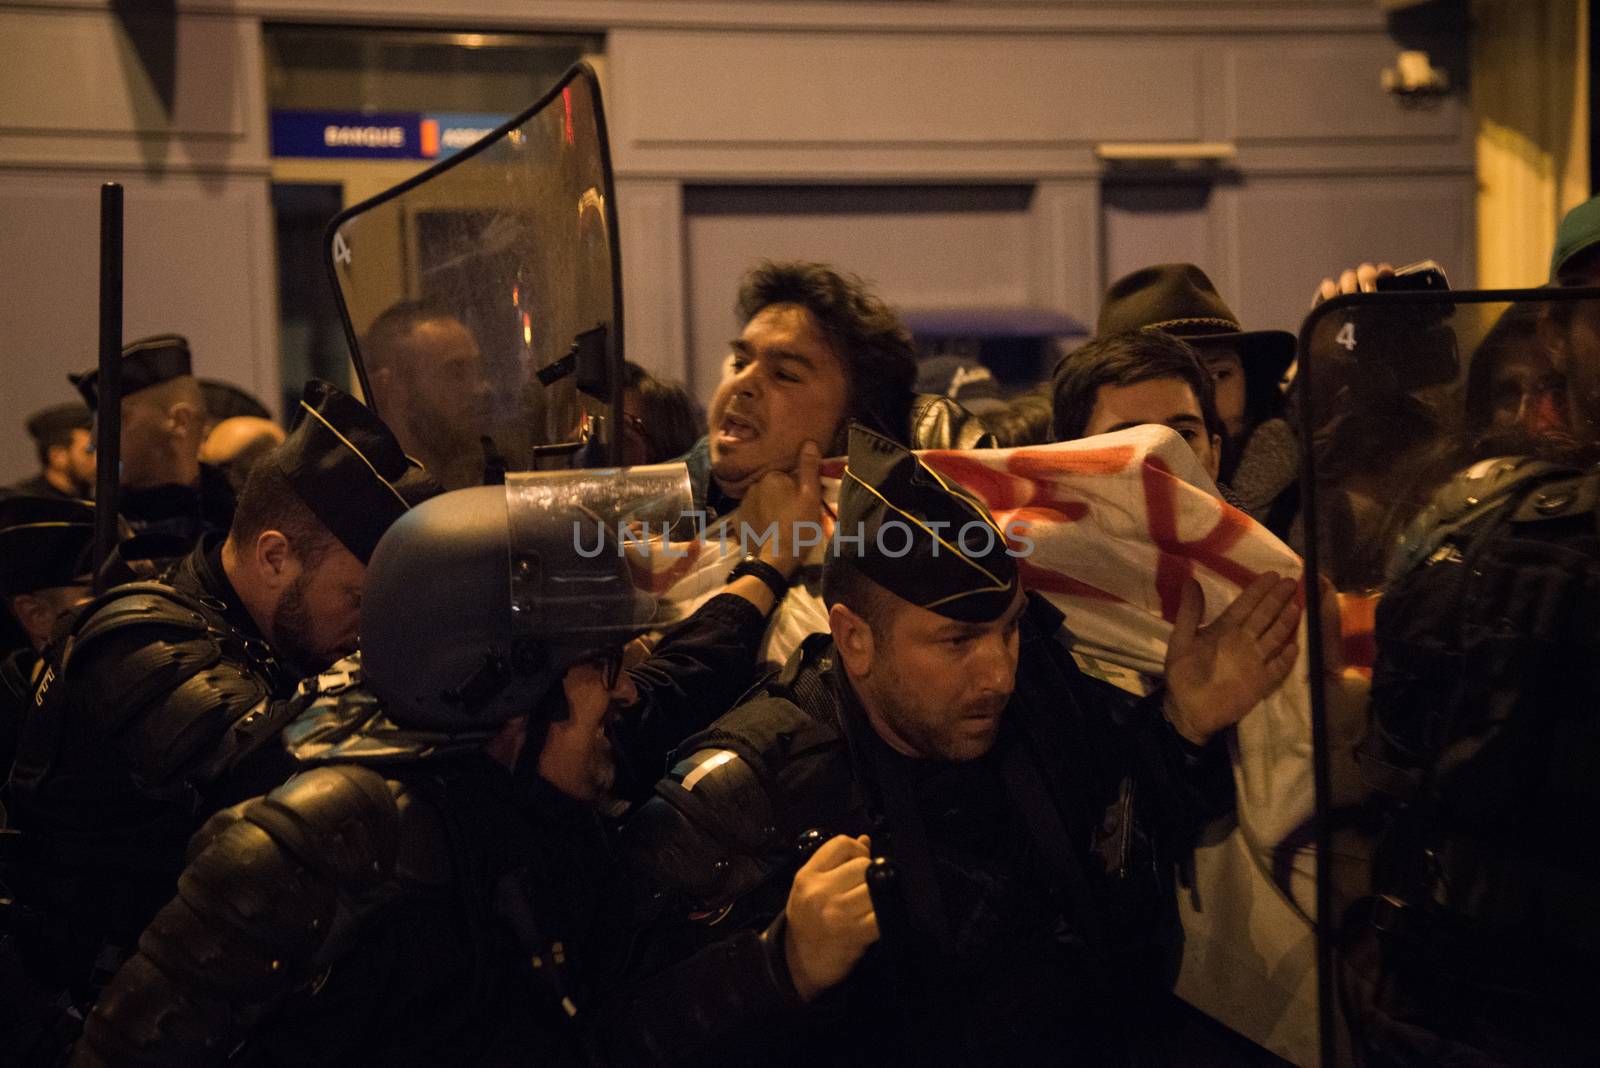 FRANCE, Paris: French police officers face protesters during a night demonstration in front of a police station in the 2nd arrondissement of Paris, on April 12, 2016. Protesters claim the release of a student arrested earlier in the day. 